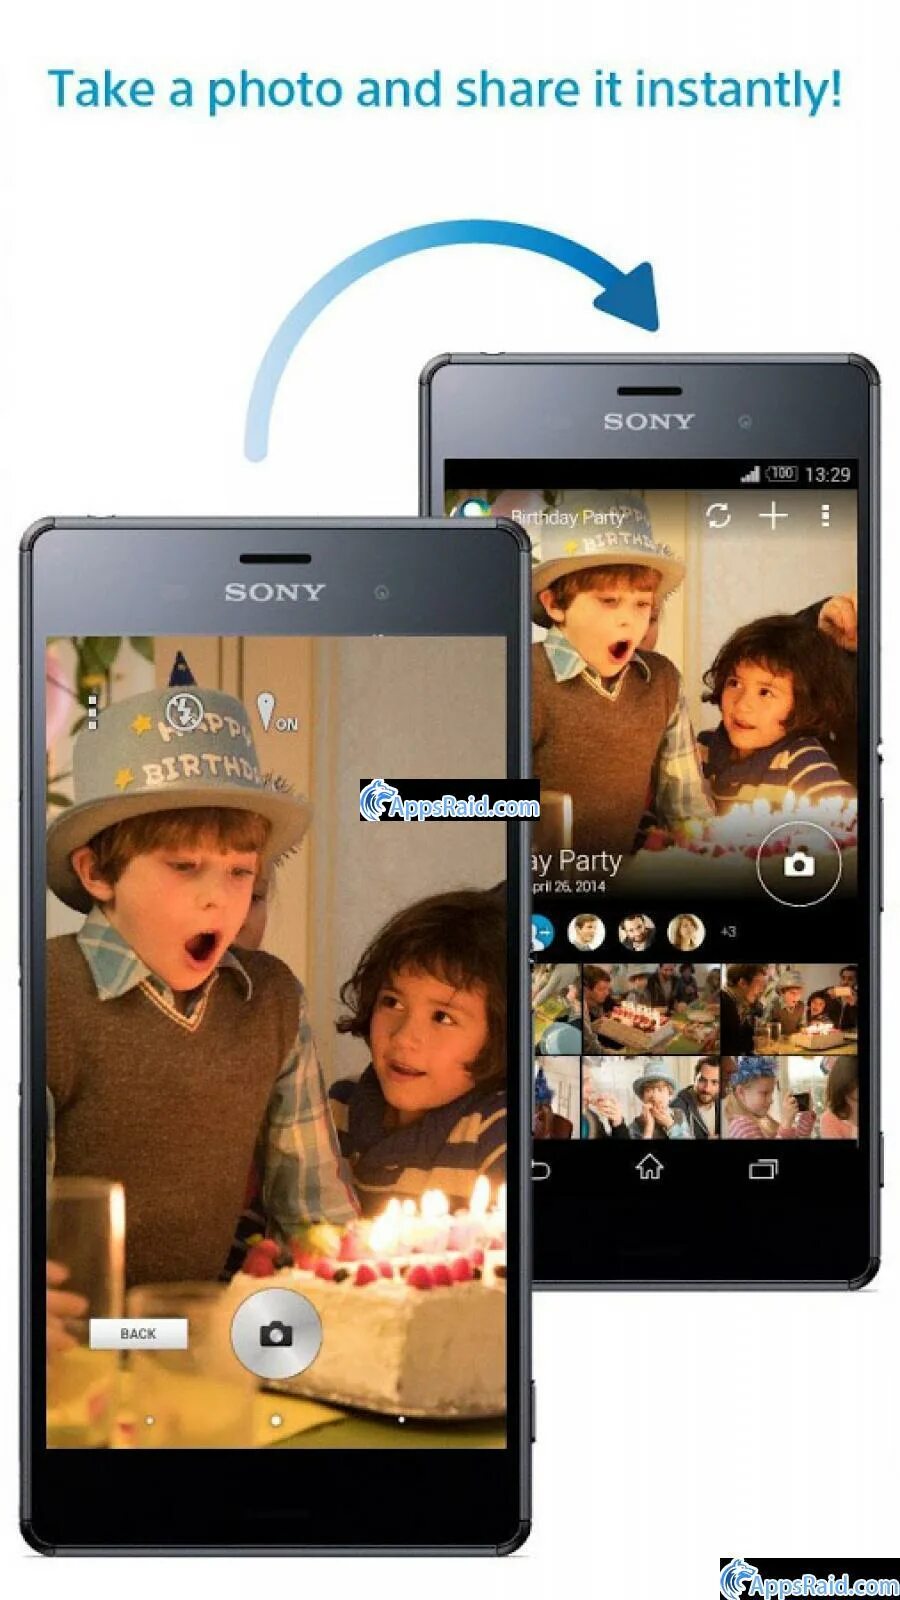 PLAYMEMORIES Home Sony. Sony Play Memory mobile где видео. Sony instant Pass foto. Playmemories home